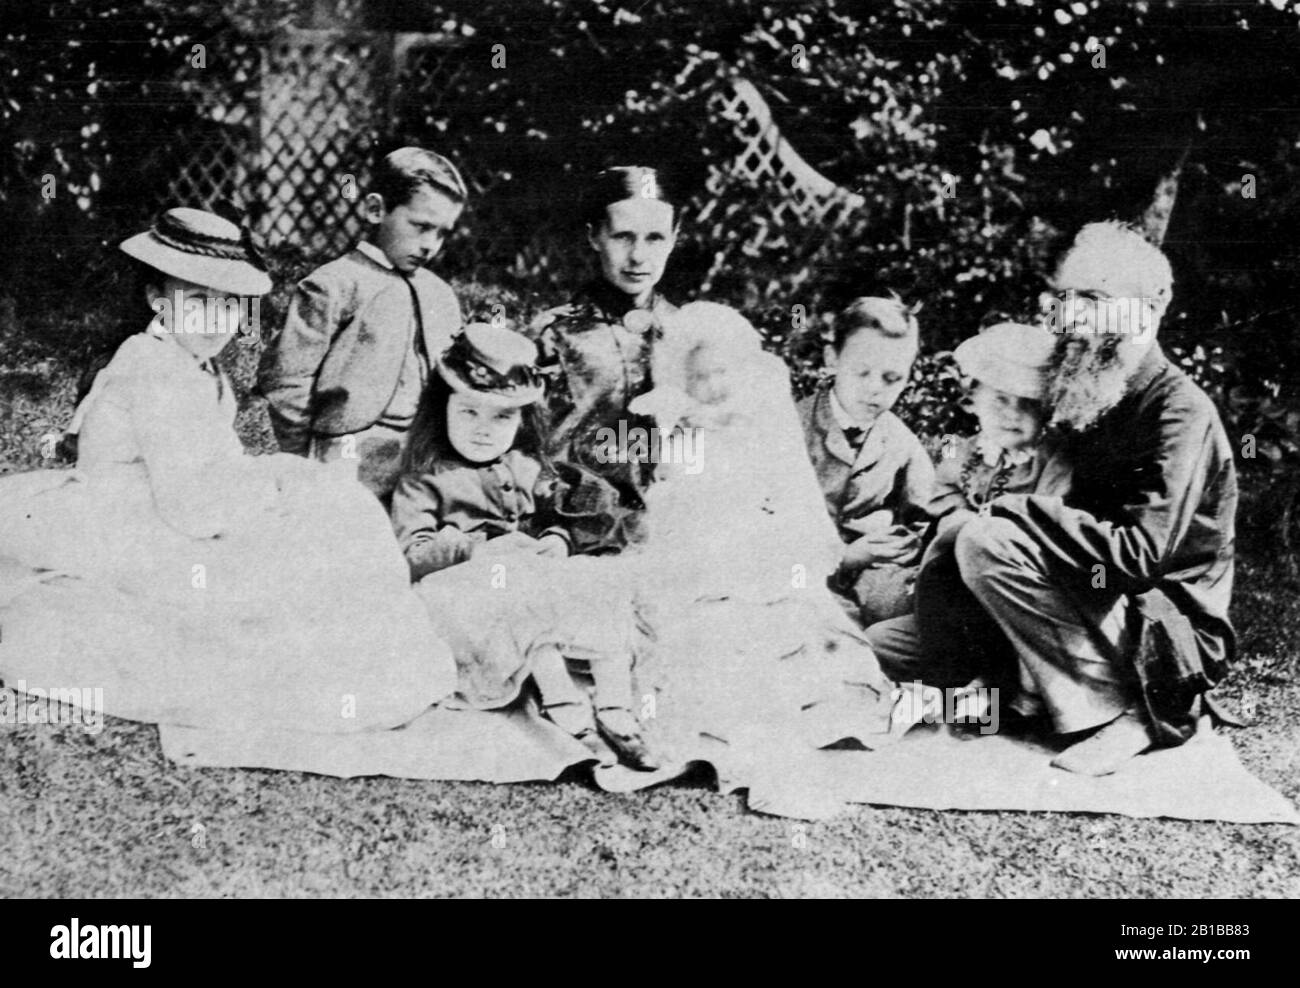 Frith, Francis - Francis Frith mit der Familie Stockfoto